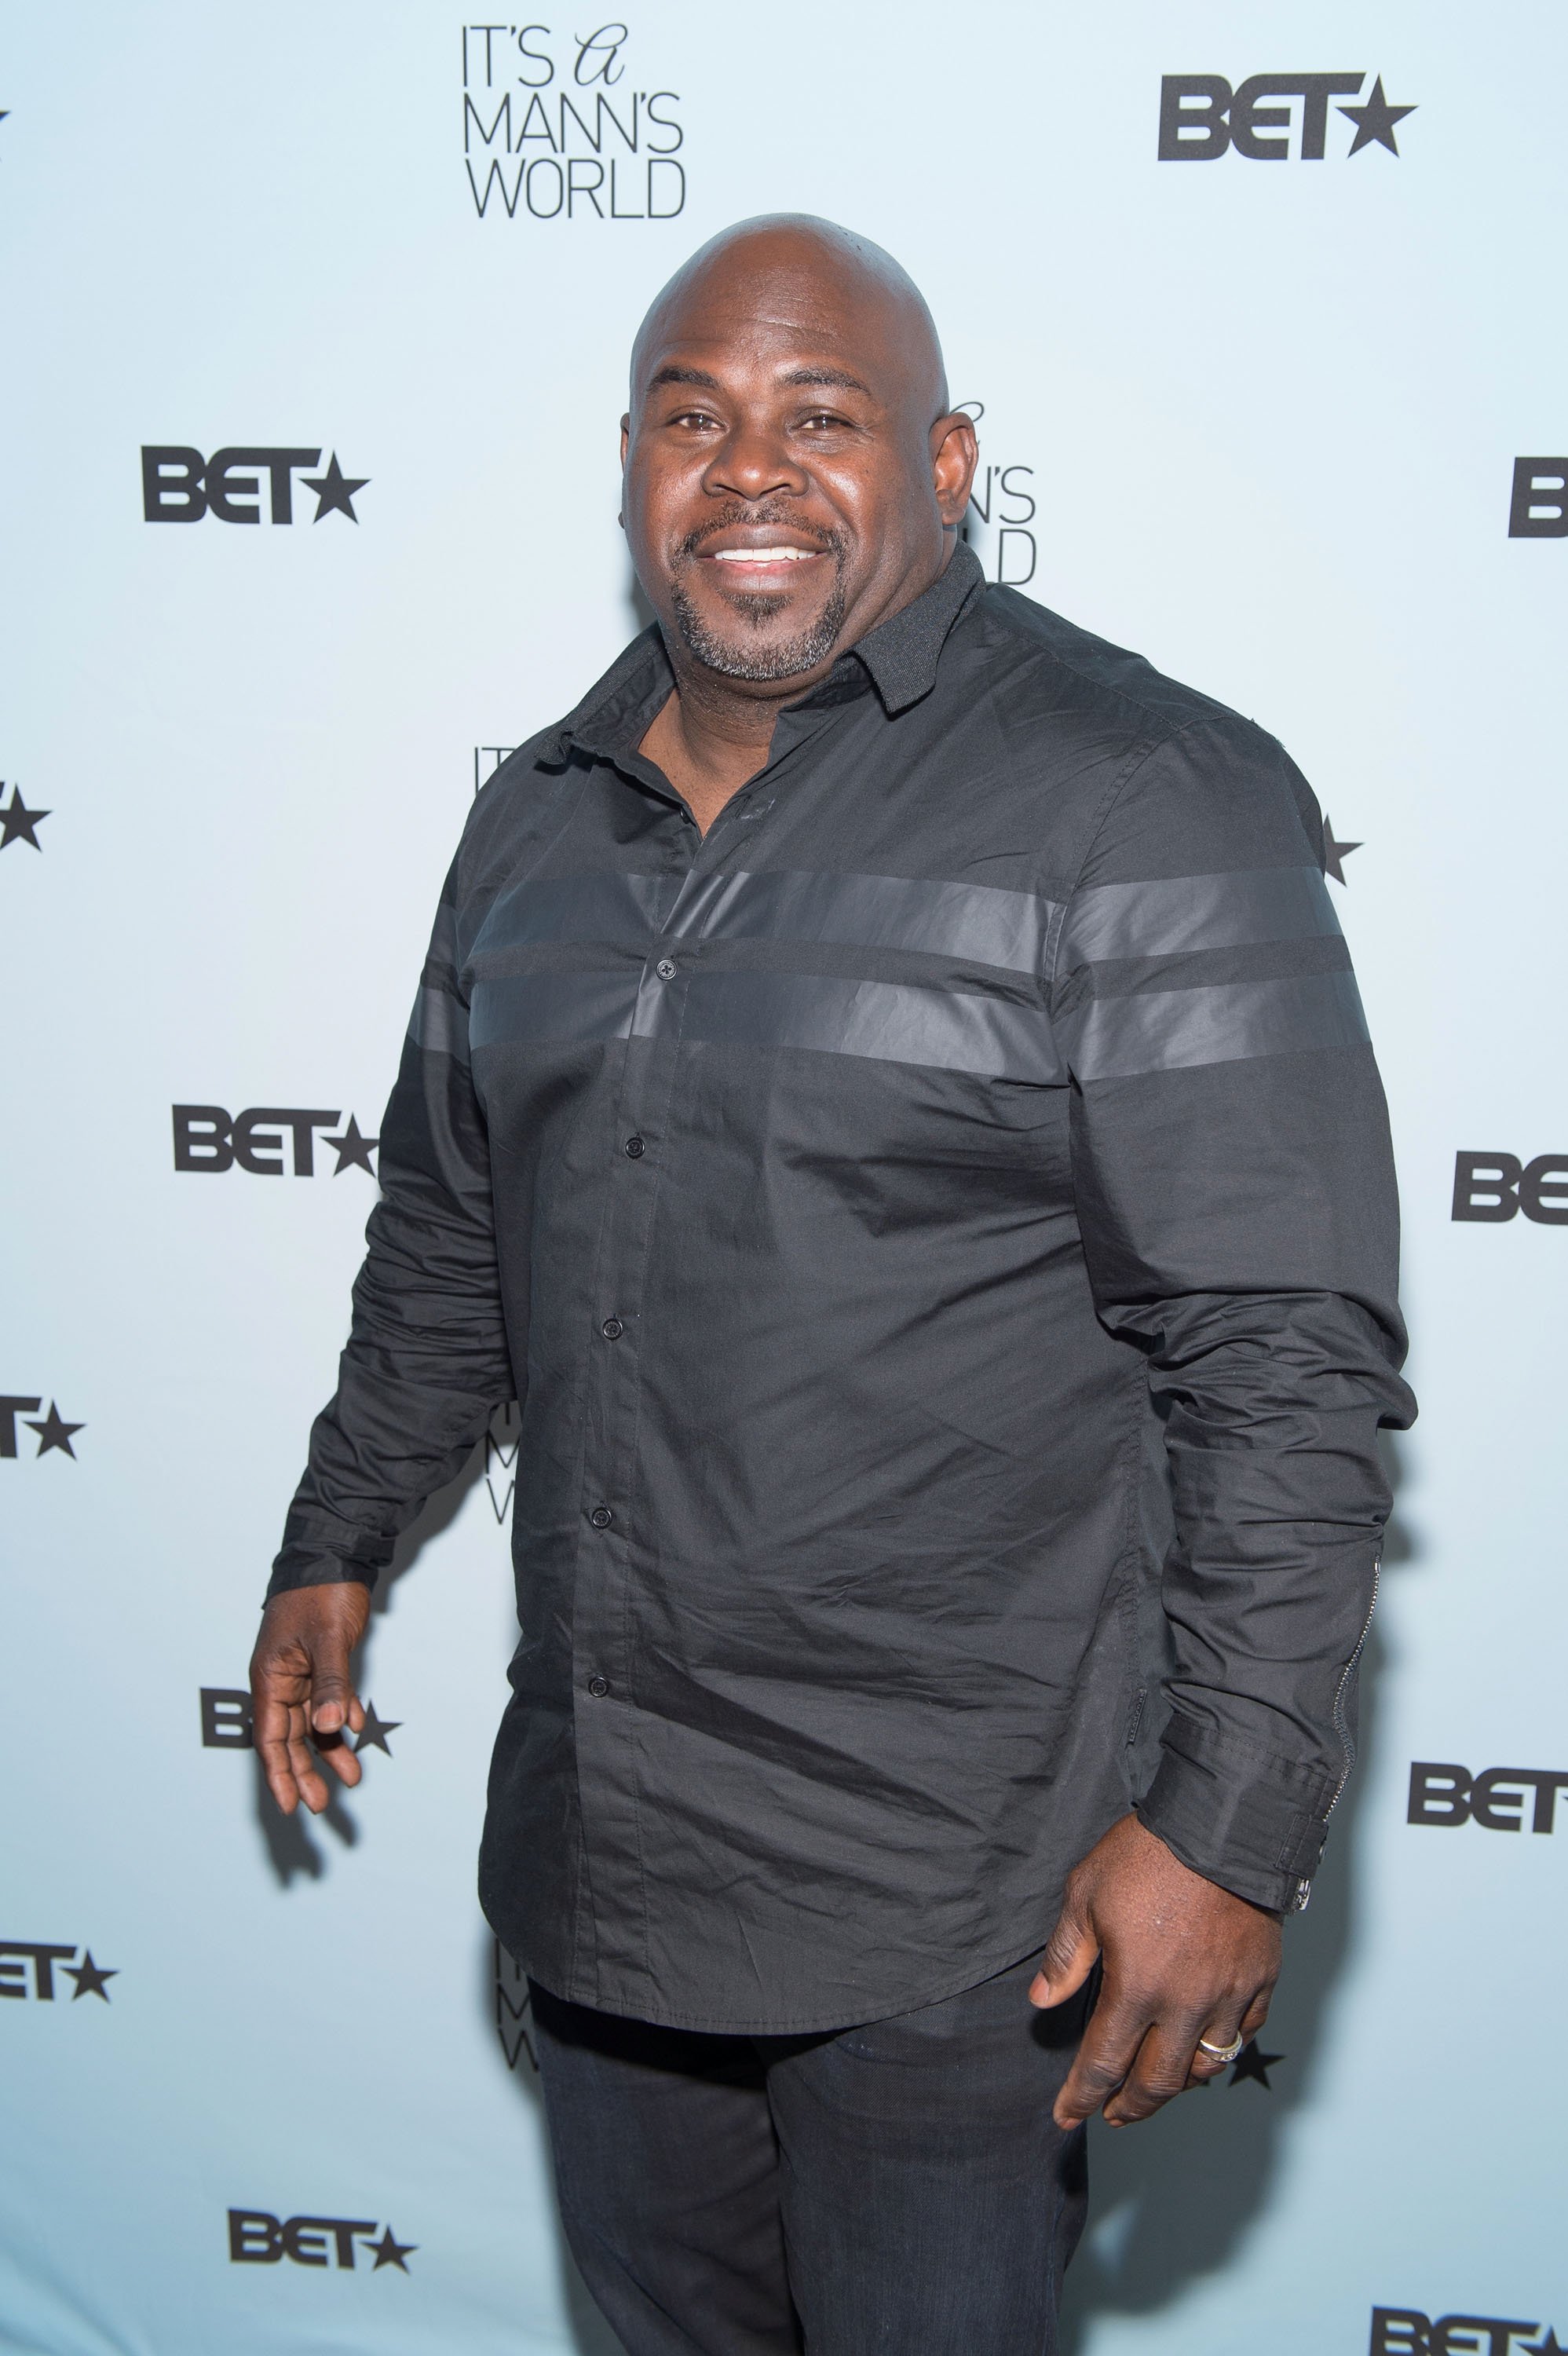 David Mann attends the season 2 luncheon screening of 'It's a Mann's World' at TRACE at the W on February 16, 2016 in Atlanta, Georgia. | Photo by Marcus Ingram/BET/Getty Images